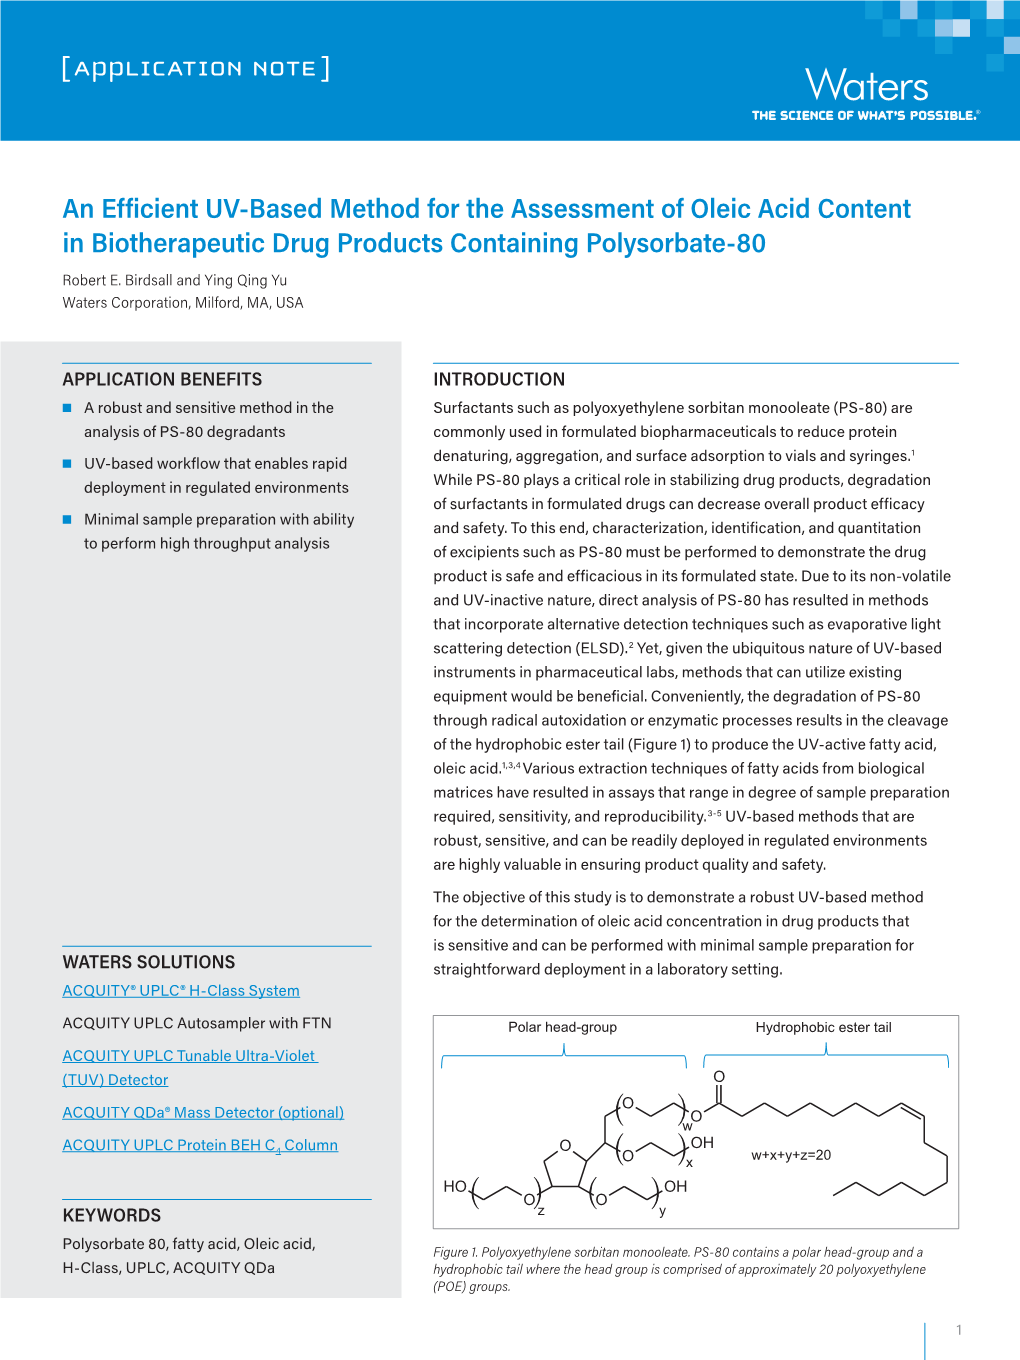 An Efficient UV-Based Method for the Assessment of Oleic Acid Content in Biotherapeutic Drug Products Containing Polysorbate-80 Robert E